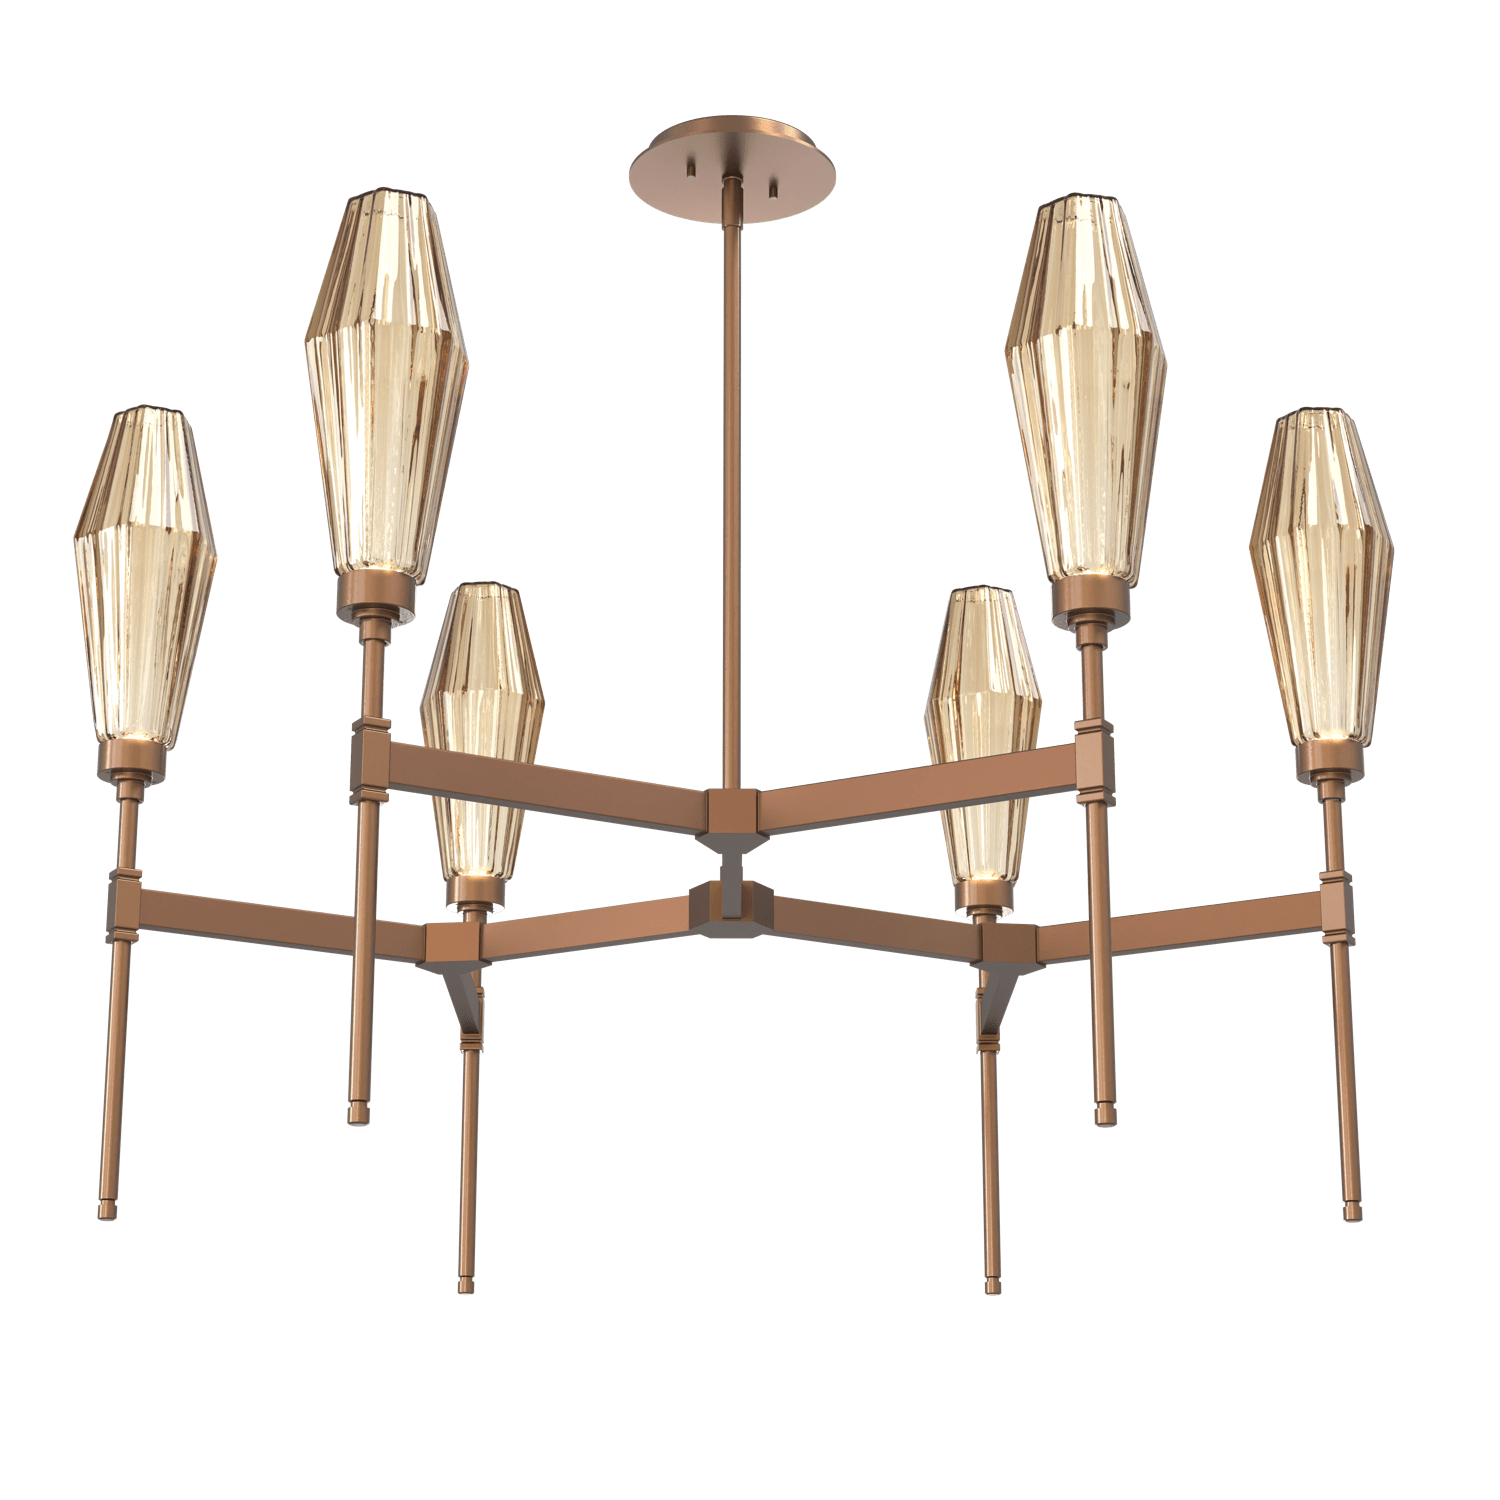 CHB0049-37-BB-RB-Hammerton-Studio-Aalto-37-inch-round-belvedere-chandelier-with-burnished-bronze-finish-and-optic-ribbed-bronze-glass-shades-and-LED-lamping